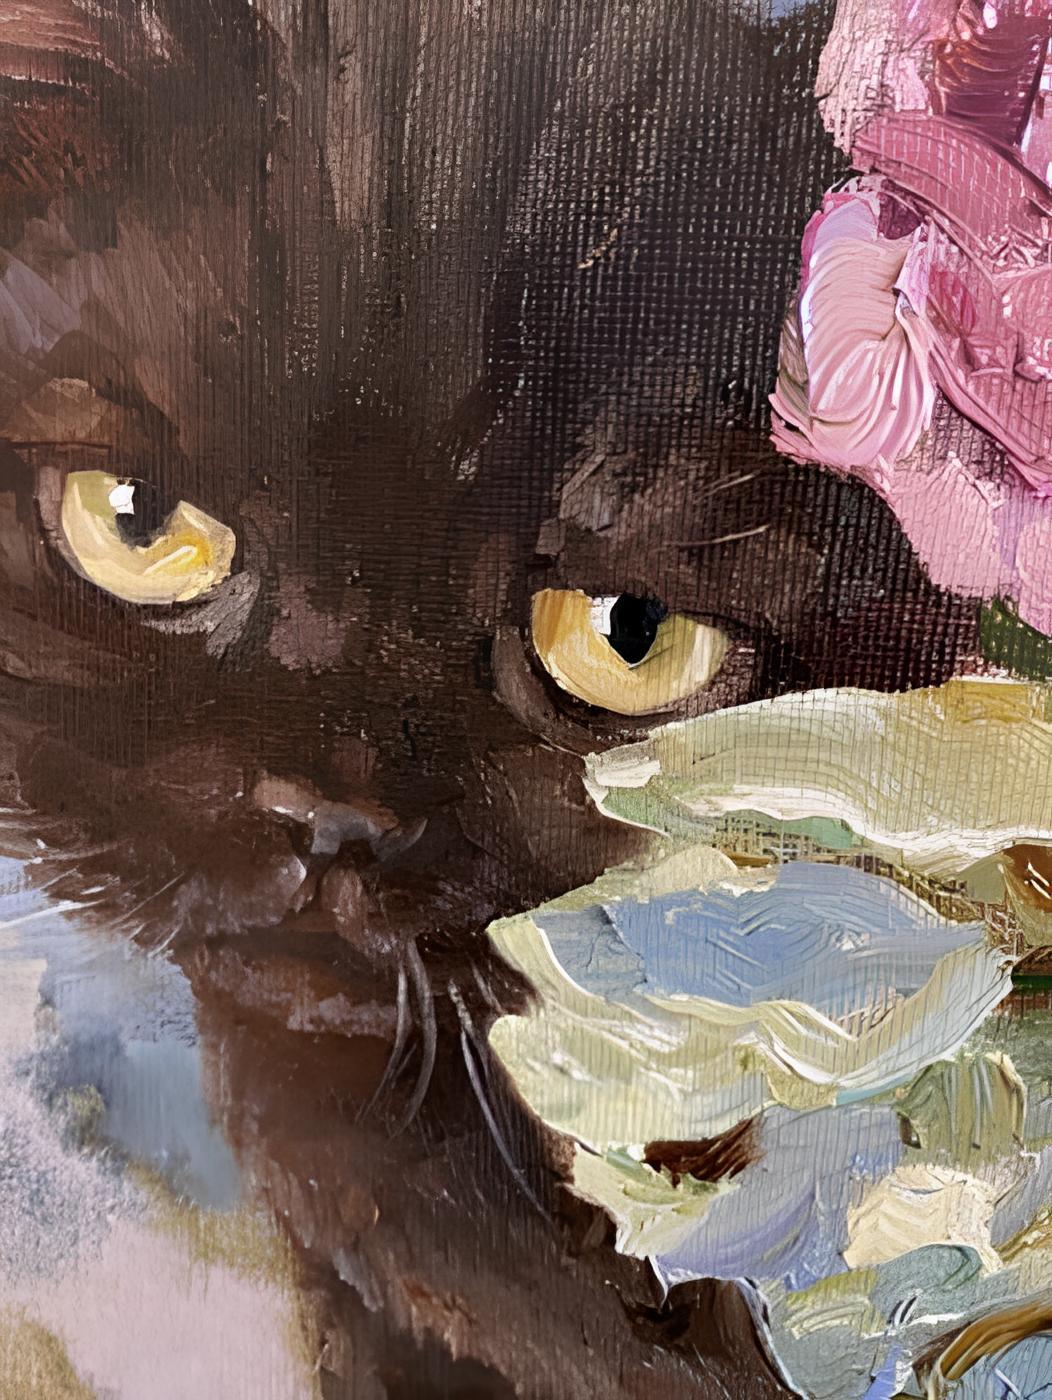 In this oil painting, I've juxtaposed vibrant, blooming roses with the enigmatic presence of felines to embody the interplay of beauty and mystery. The textured strokes capture the rawness of emotions, inviting viewers to ponder the untold stories